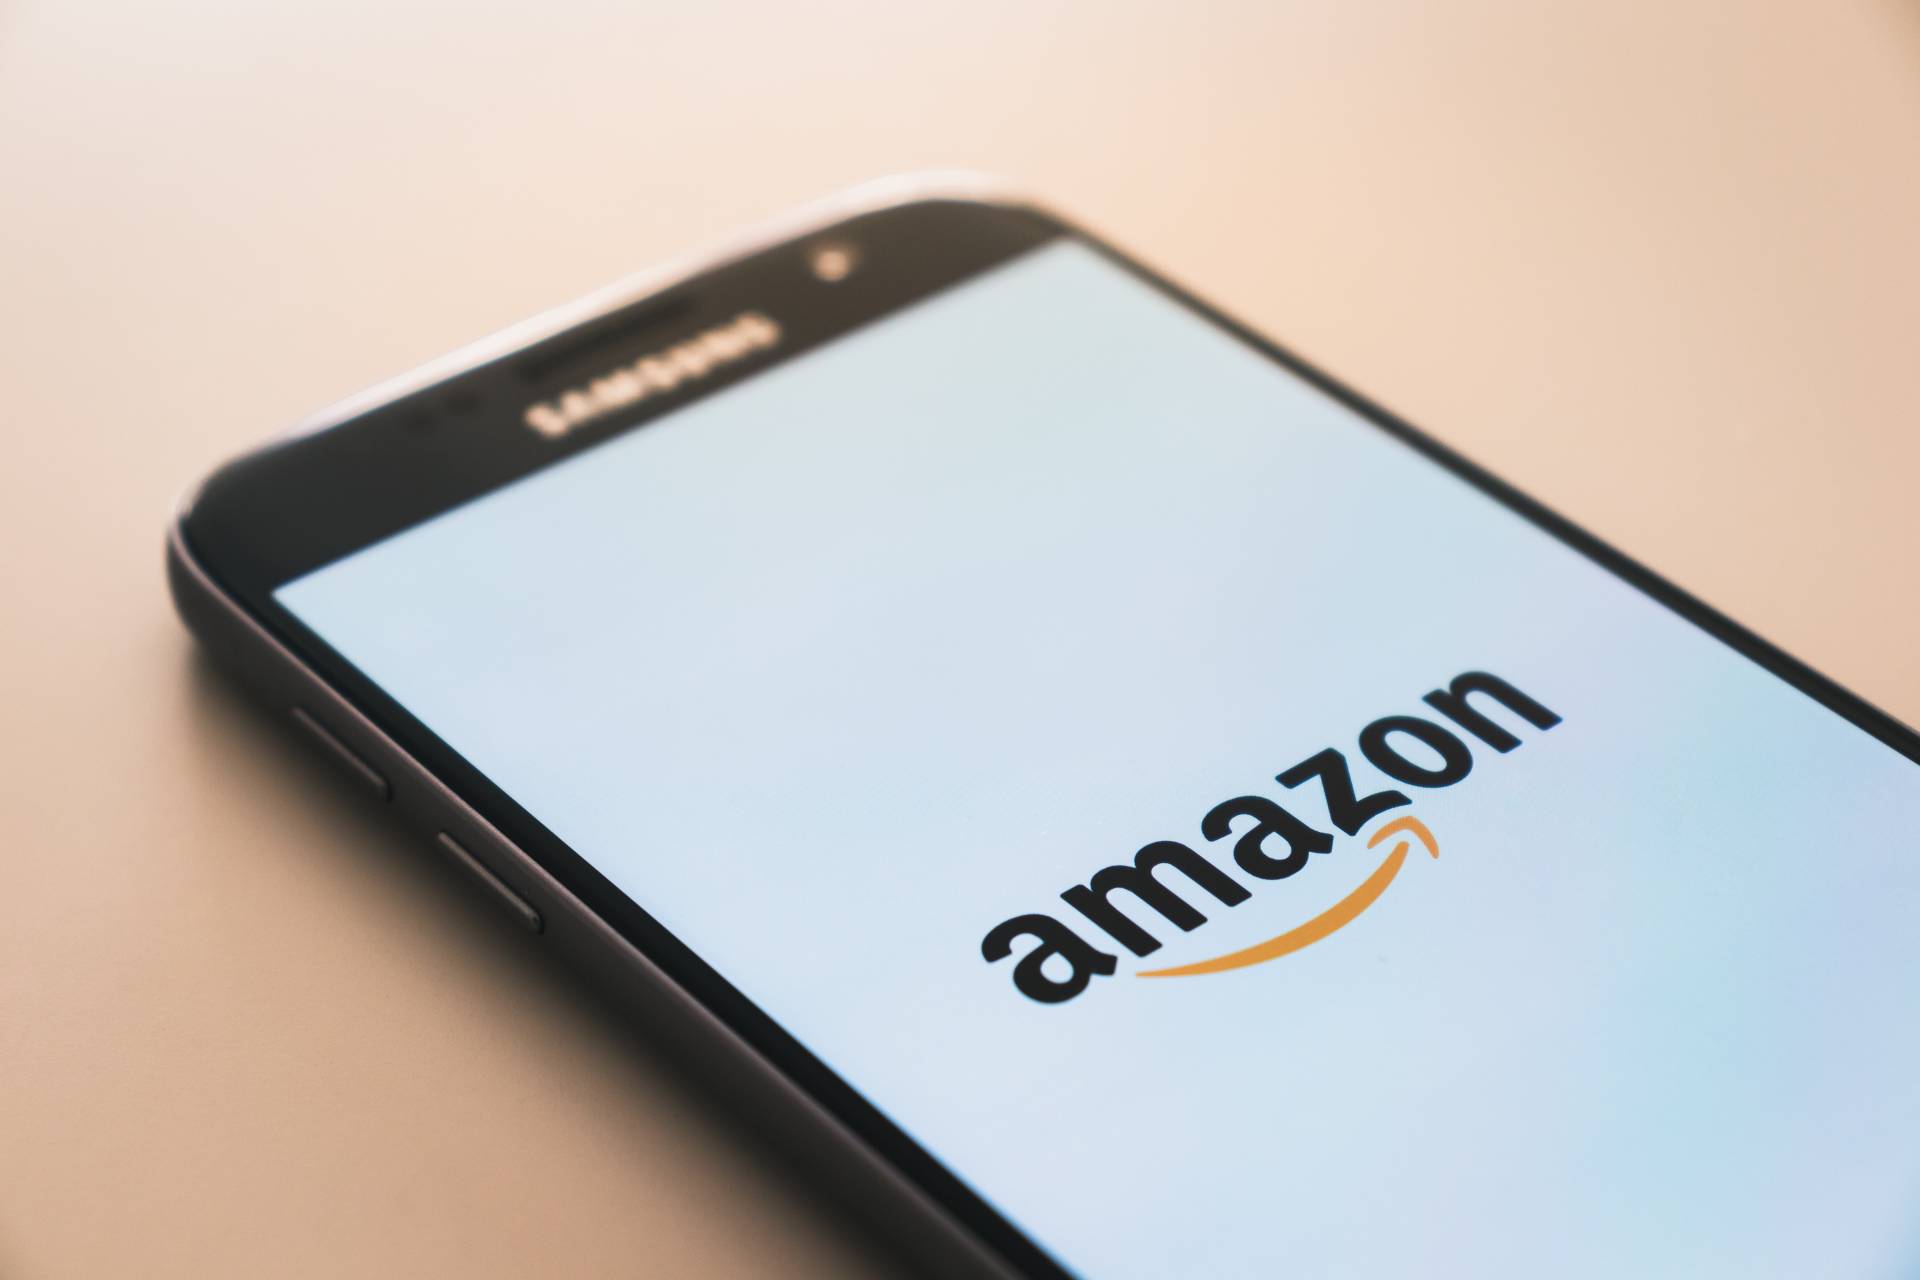 Amazon’s Impending FTC Antitrust Suit Signals a Turning Point for Online Marketplace Dominance - readwrite.com